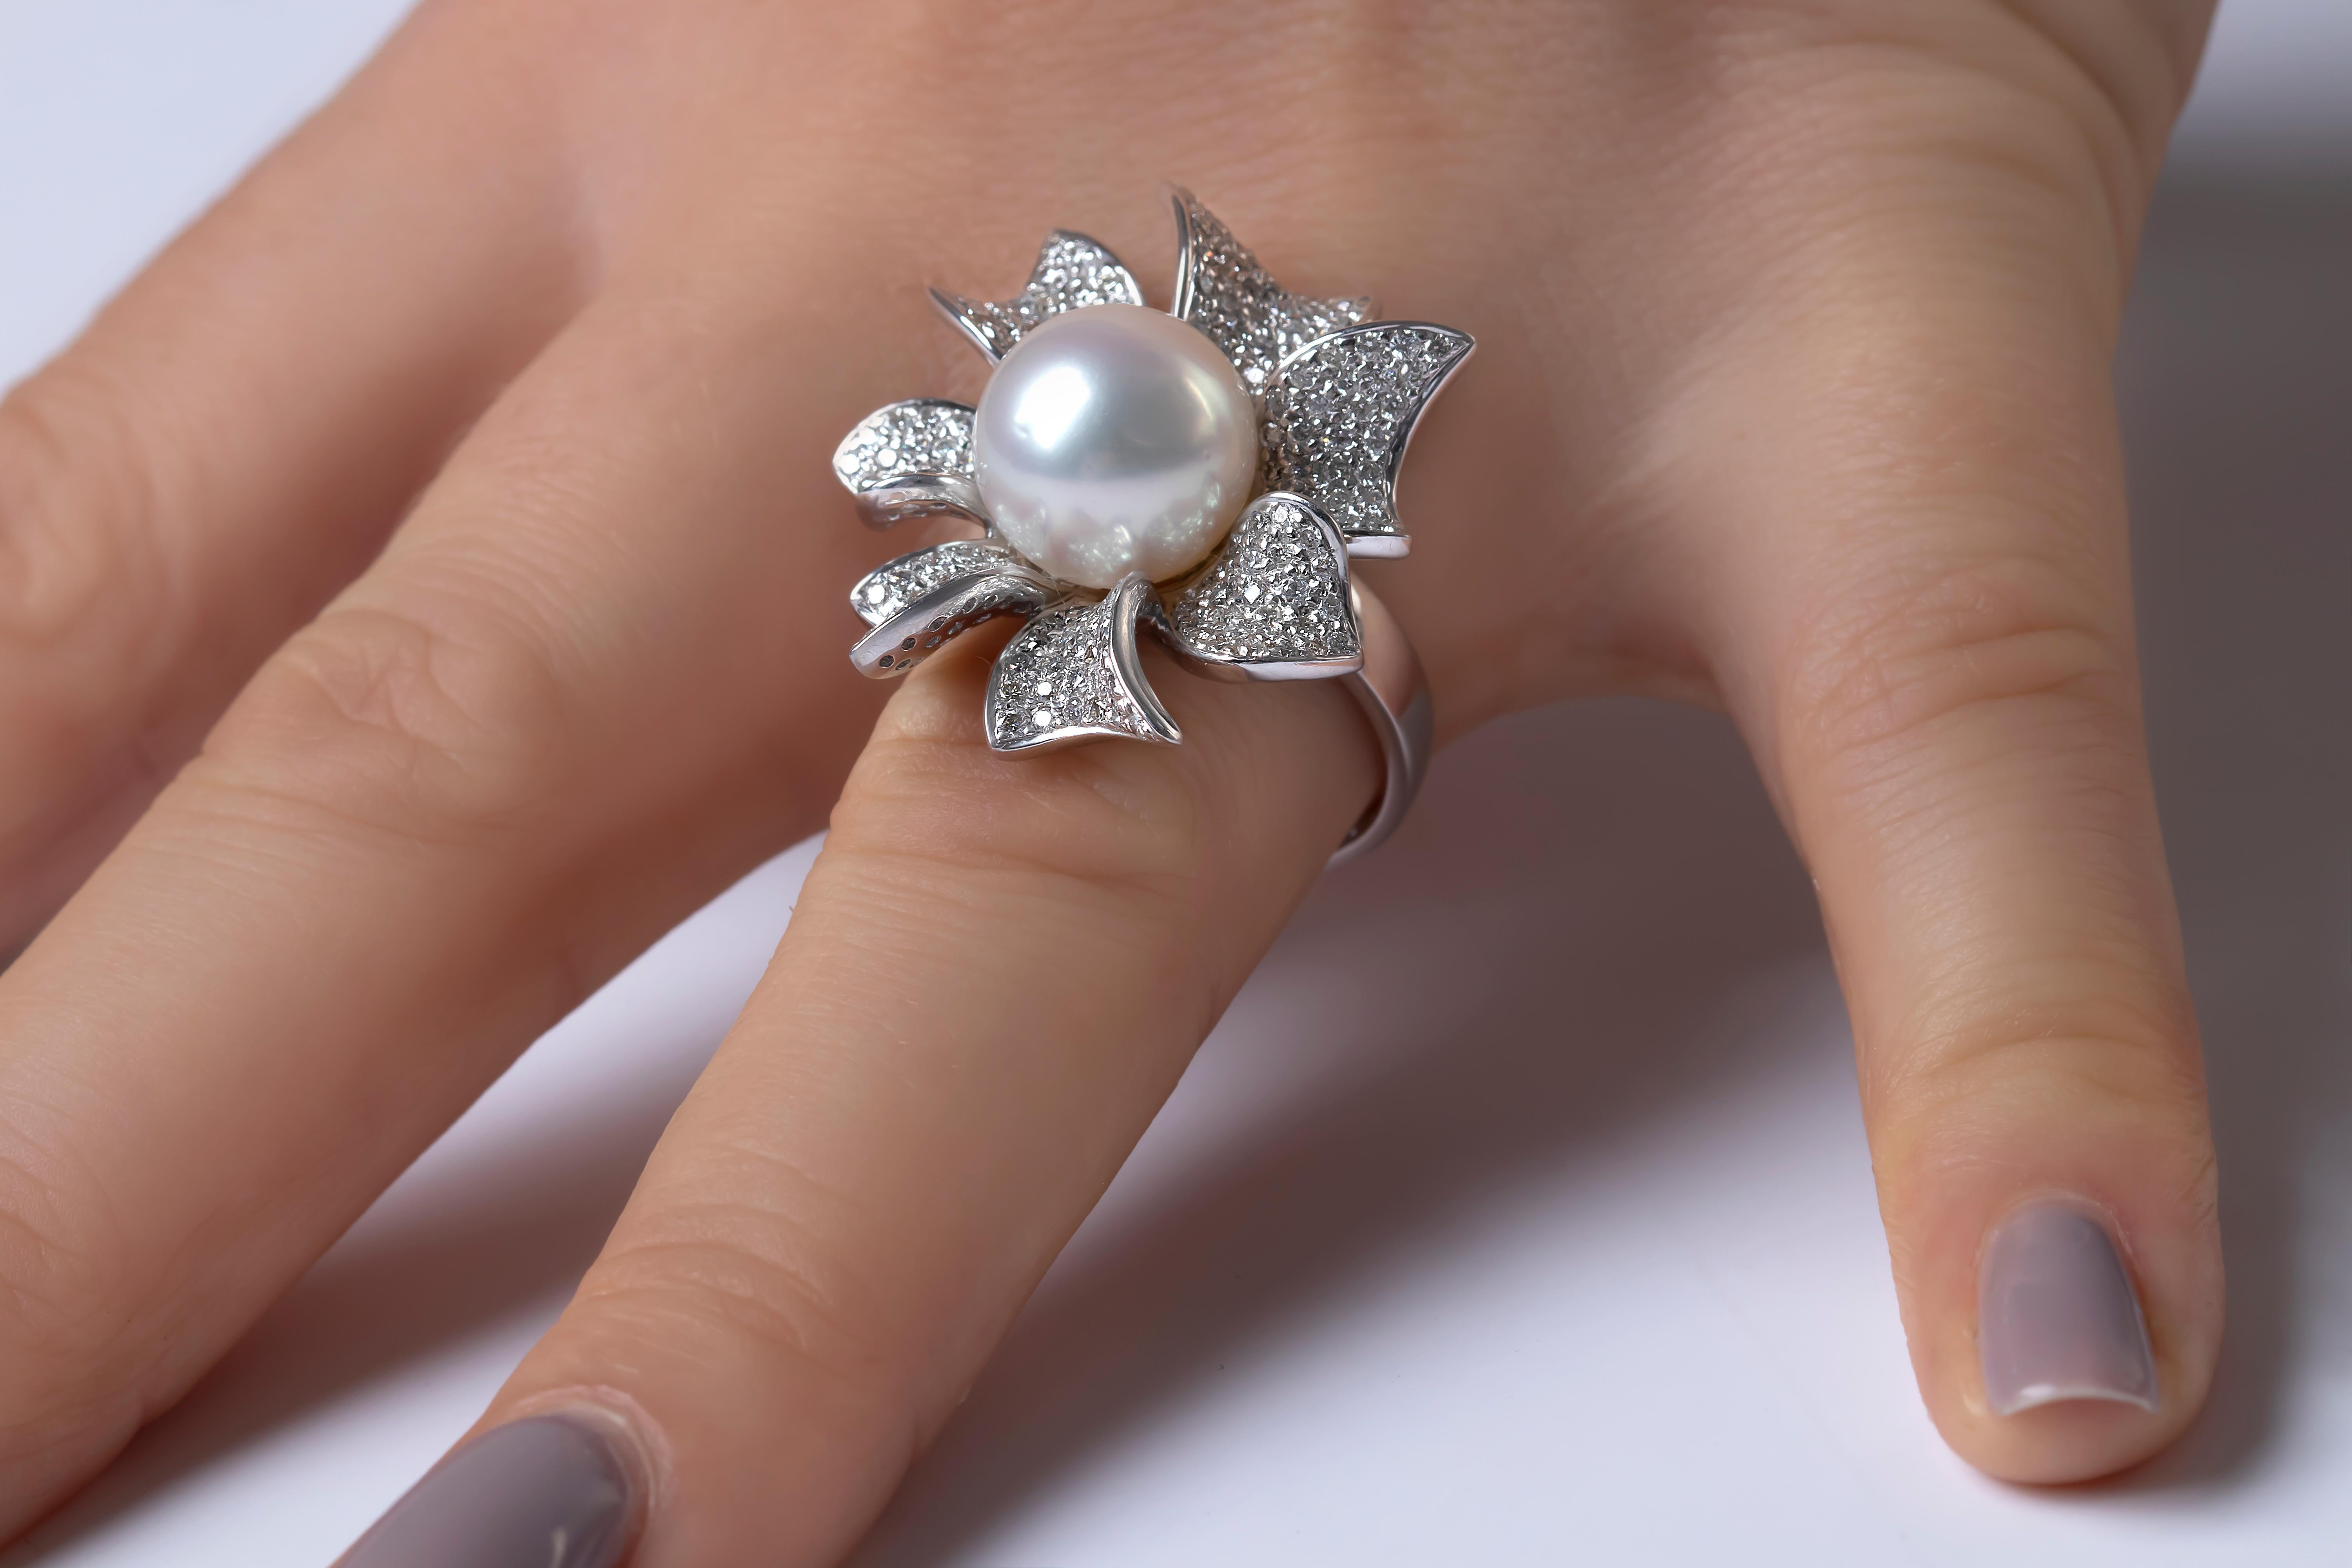 This intricate ring by Yoko London features a high-quality South Sea pearl set amongst scintillating diamond ribbons. Unique and striking, this exceptional ring will add a touch of high glamour to any evening look.  
-11-12mm South Sea Pearl 
-202